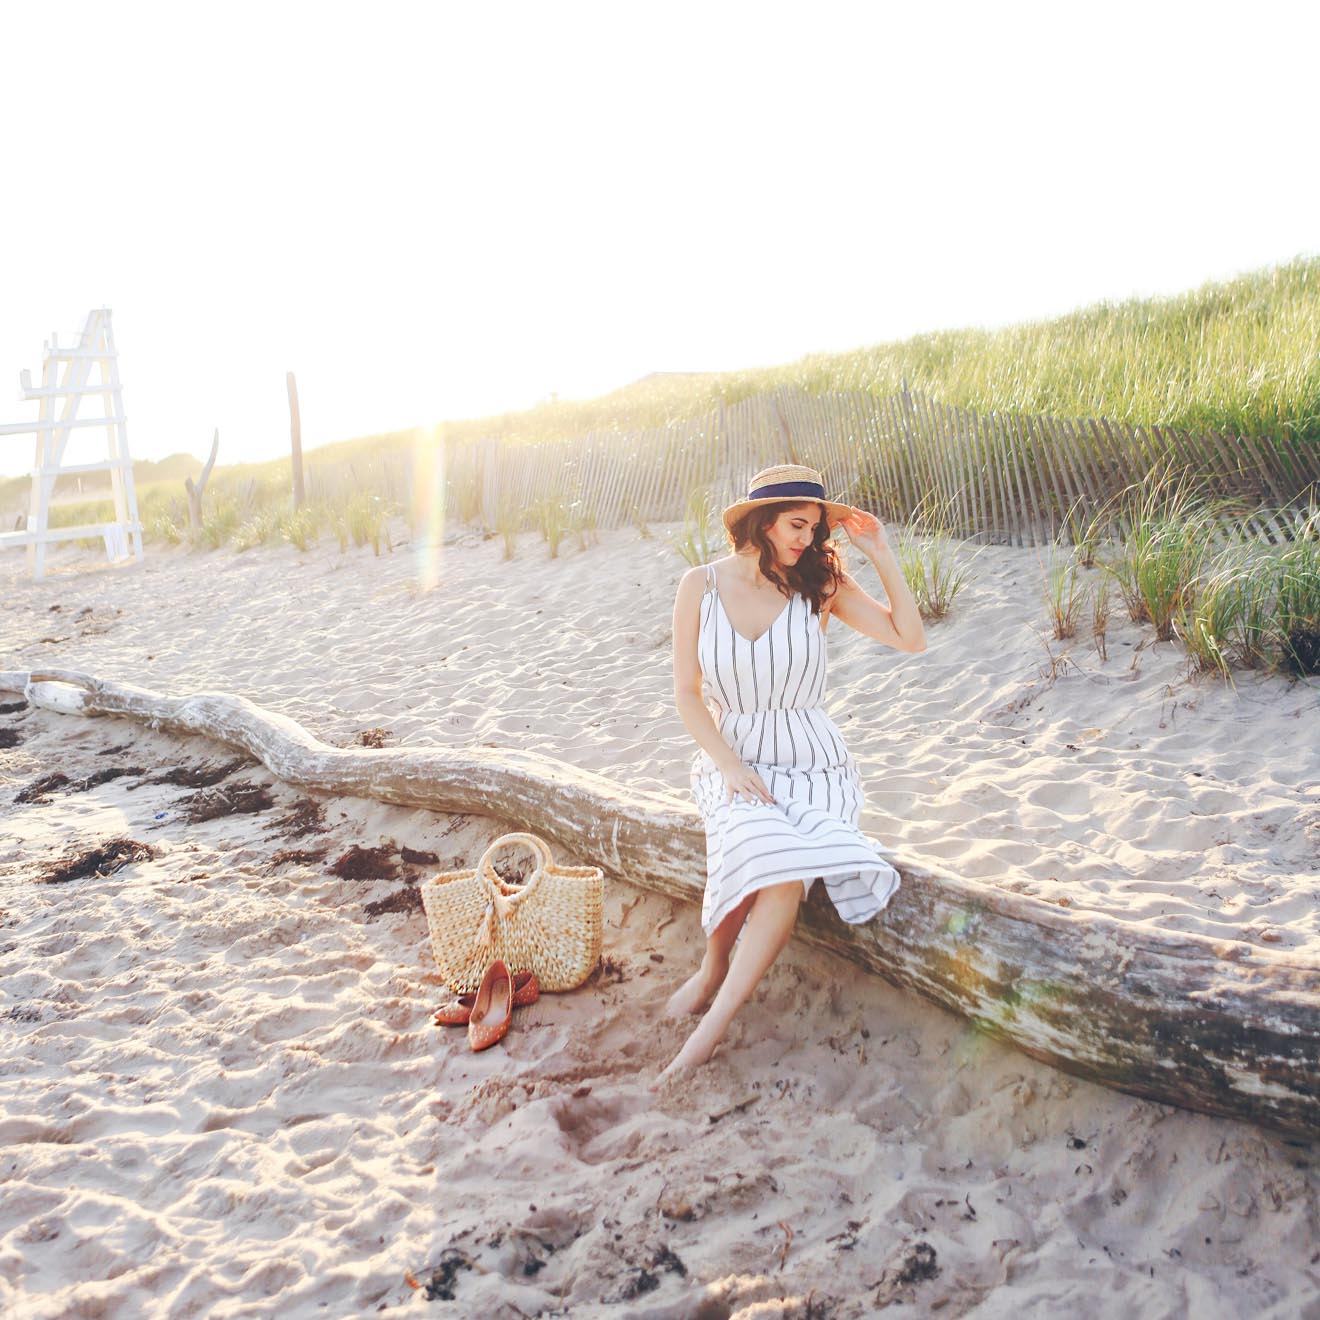 Hamptons Travel Guide, Laura Lily Fashion Travel and Lifestyle Blog, Best Places to See in The Hamptons, Ditch Plains Beach,